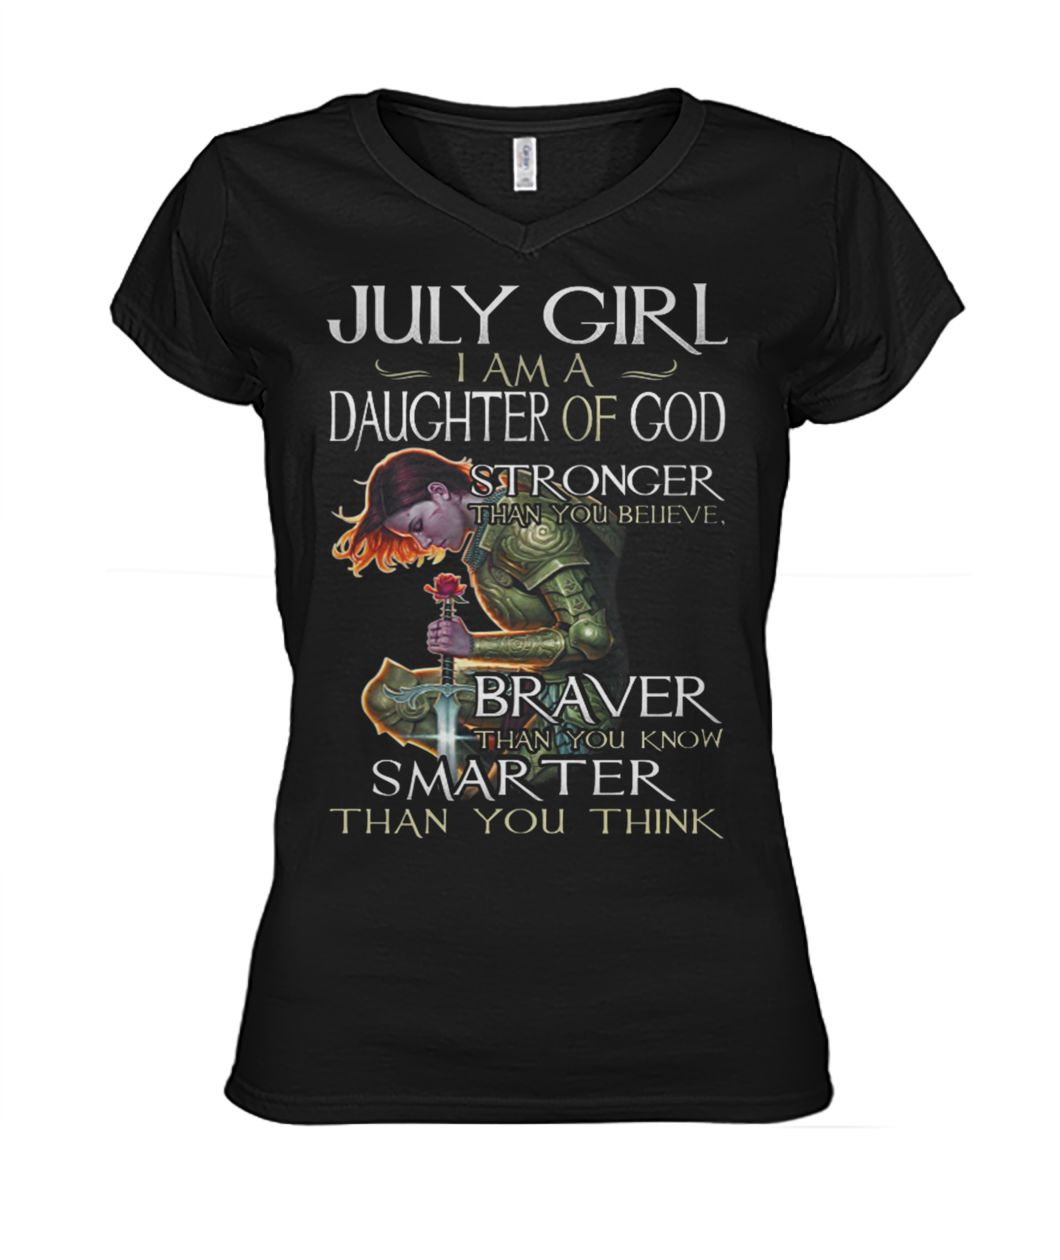 July girl I am a daughter of God stronger than you believe braver than you know smarter than you think women's v-neck